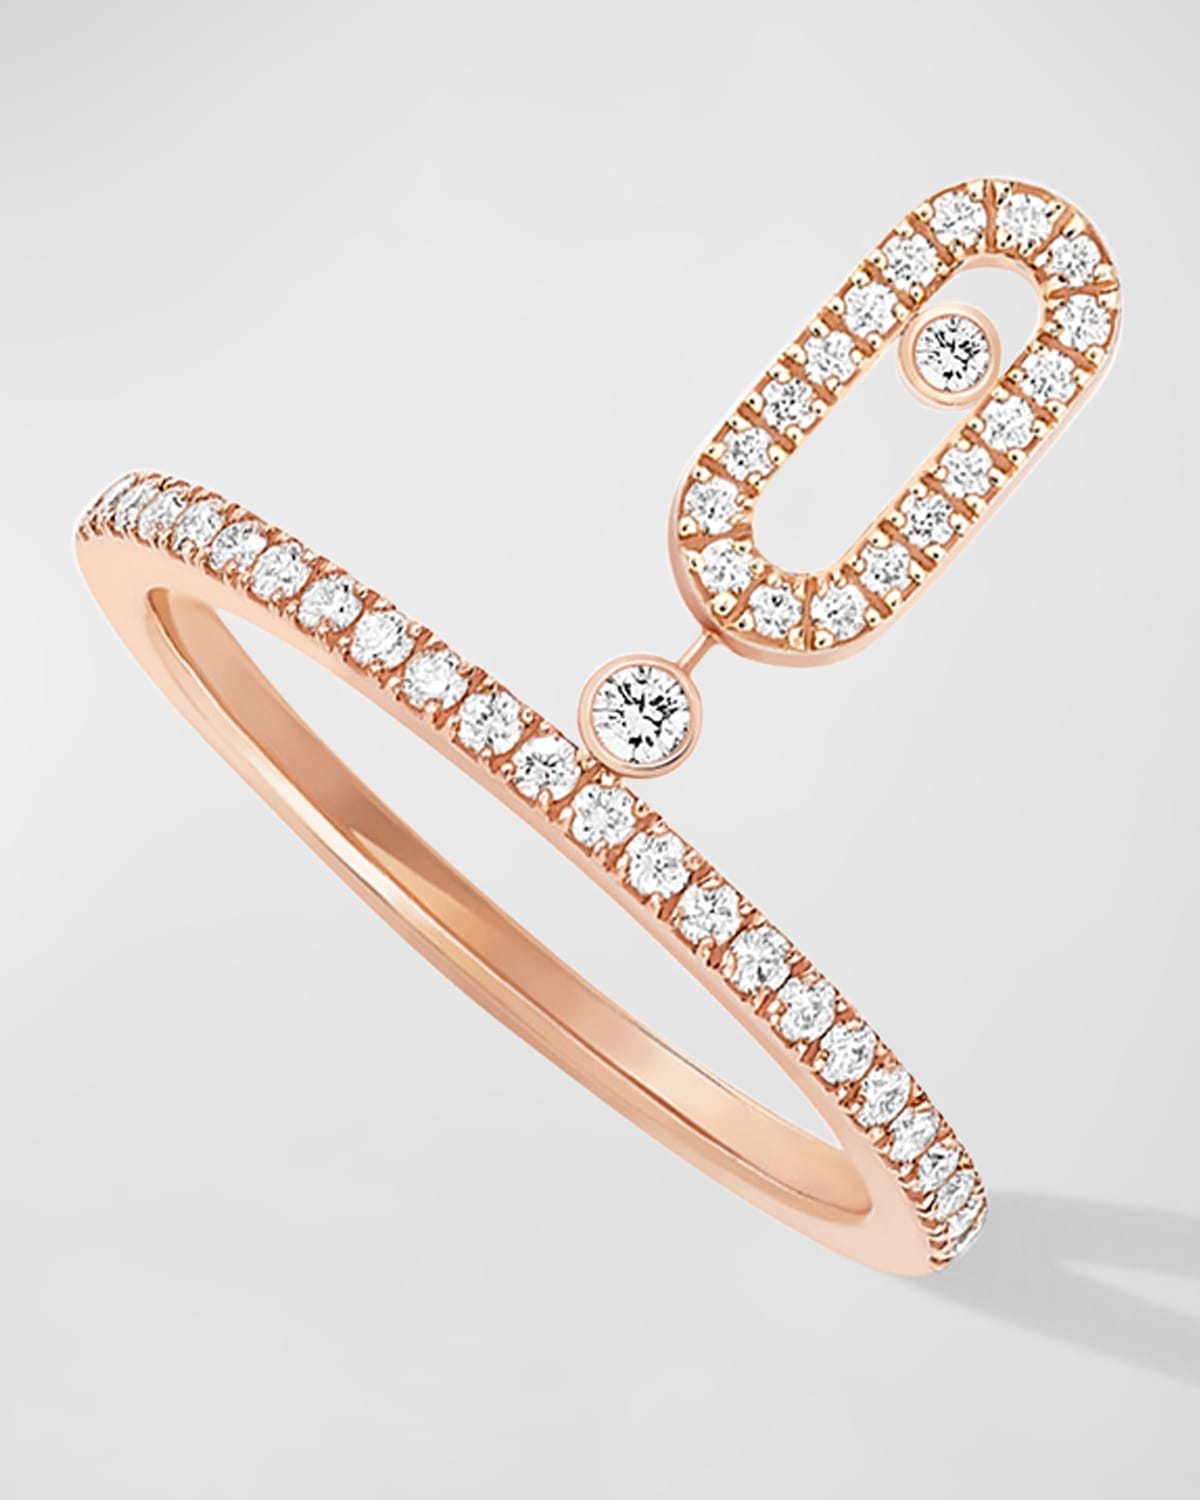 Move Uno 18K Pink Gold Pave Drop Diamond Ring